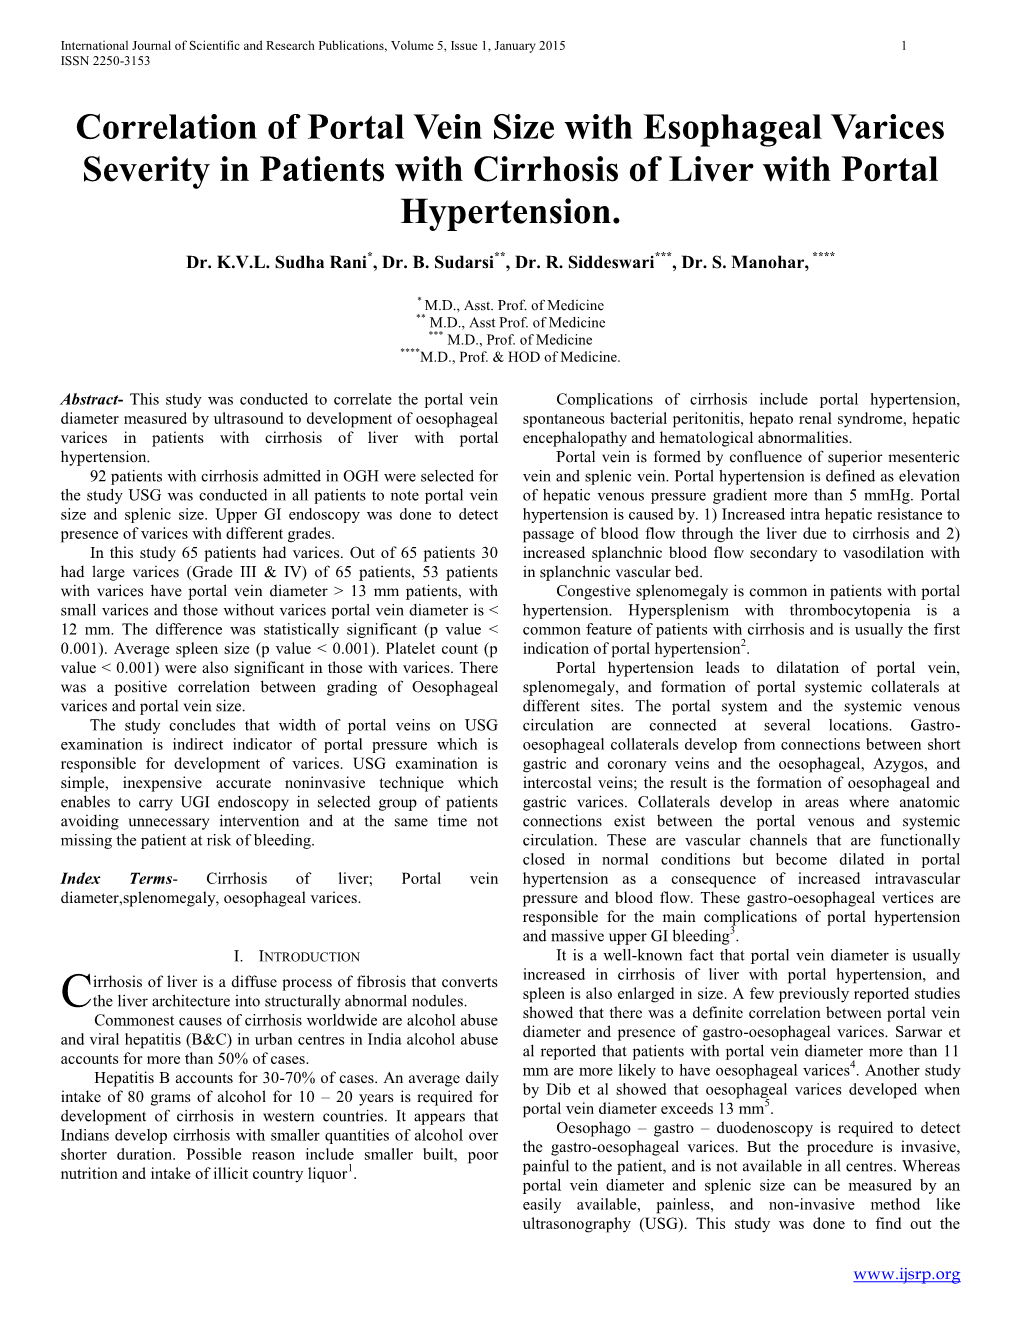 Correlation of Portal Vein Size with Esophageal Varices Severity in Patients with Cirrhosis of Liver with Portal Hypertension